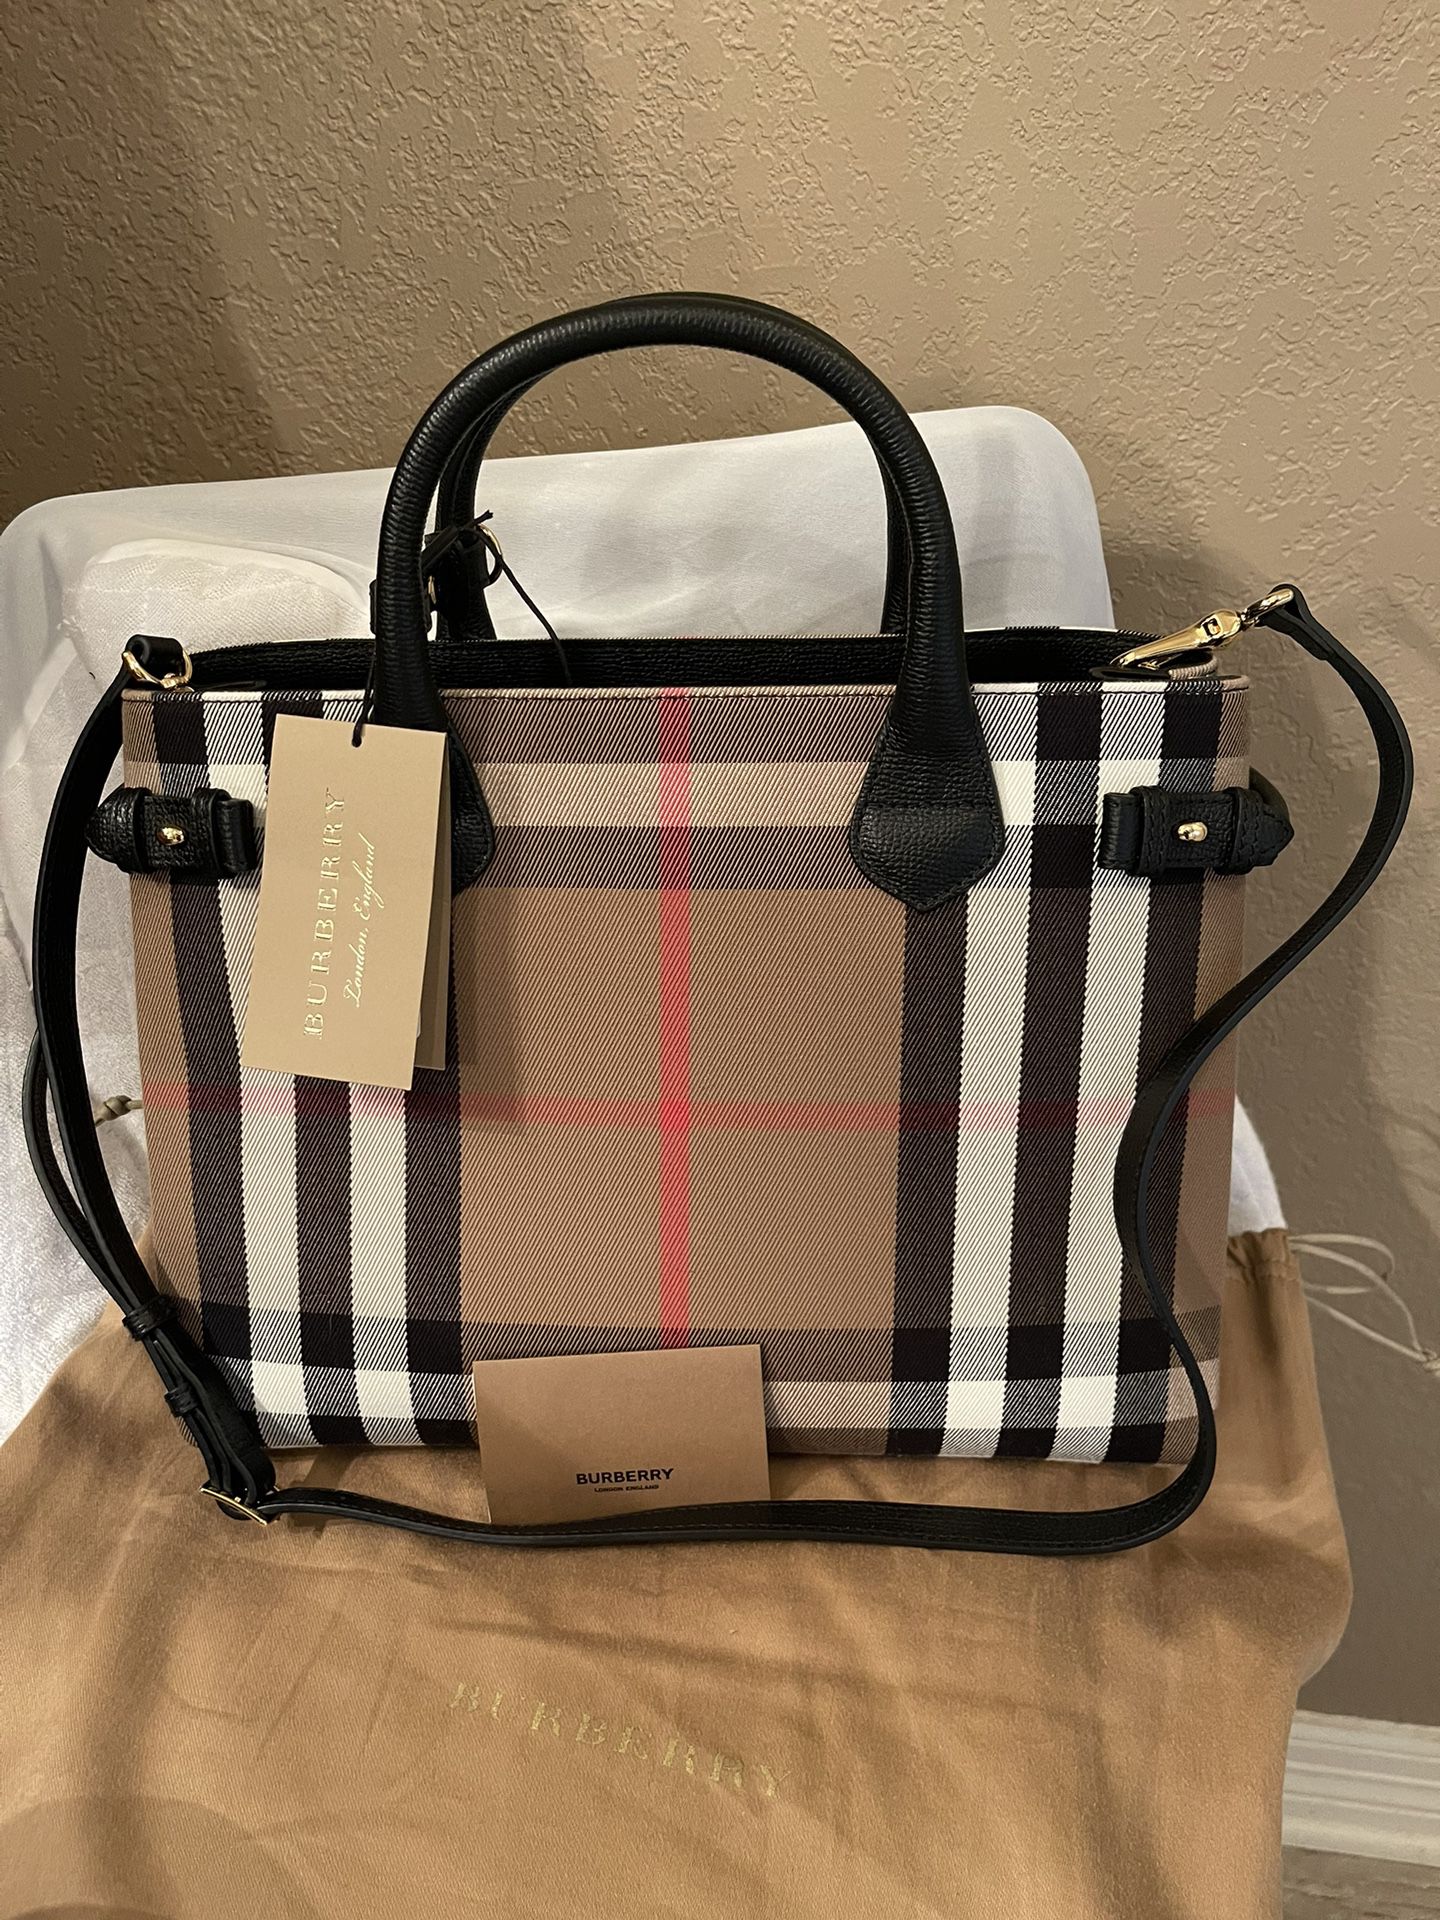 Authentic Burberry Purse New